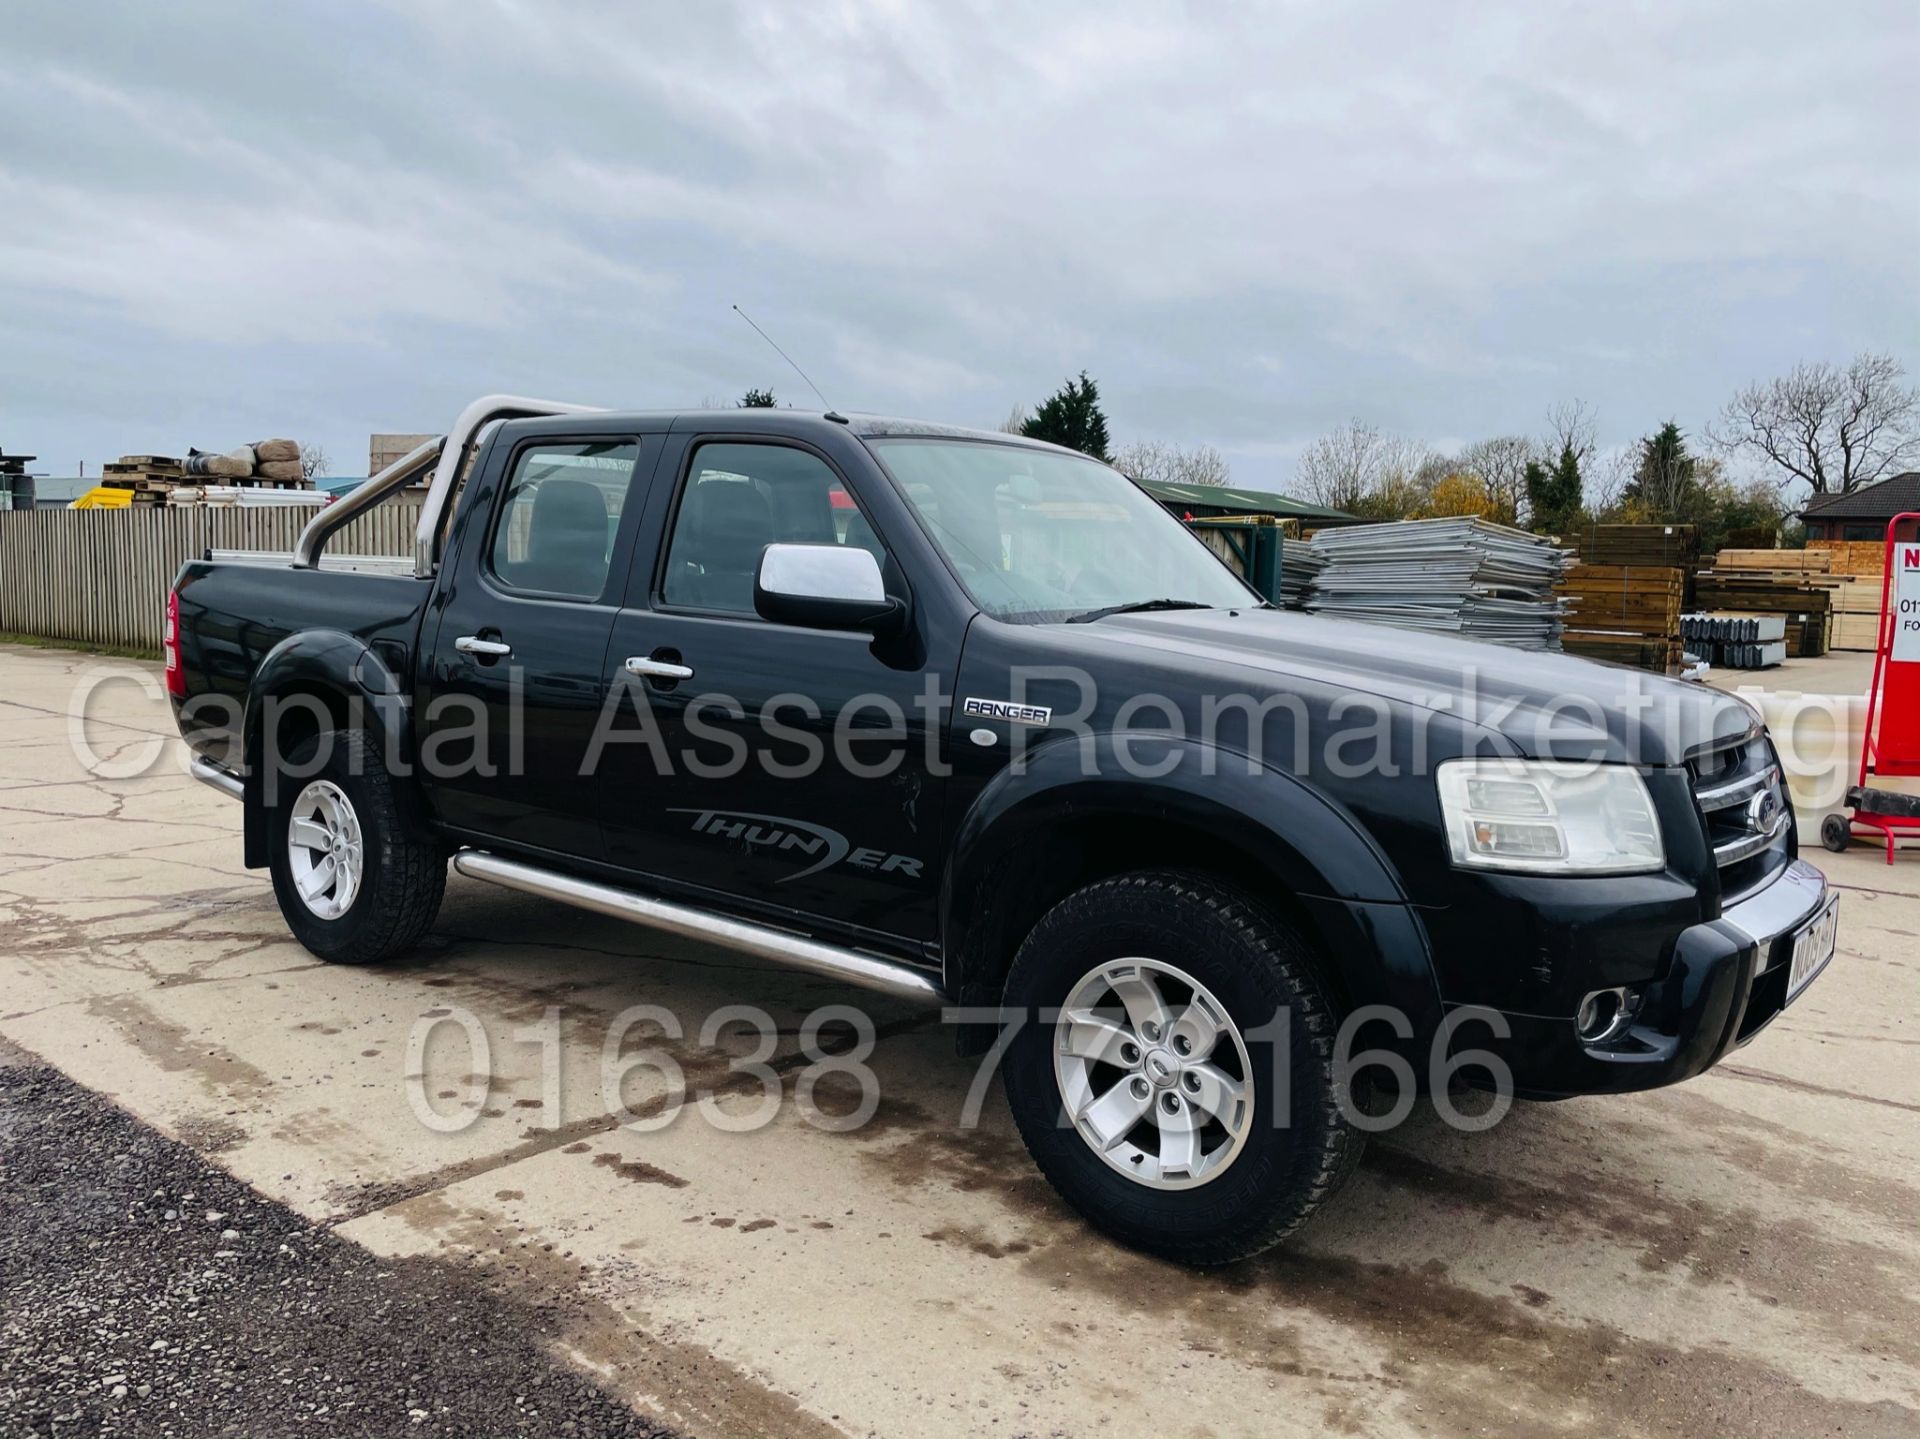 ON SALE FORD RANGER *THUNDER* DOUBLE CAB 4X4 PICK-UP (2009) '2.5 TDCI - 1 *LEATHER - A/C* (NO VAT)